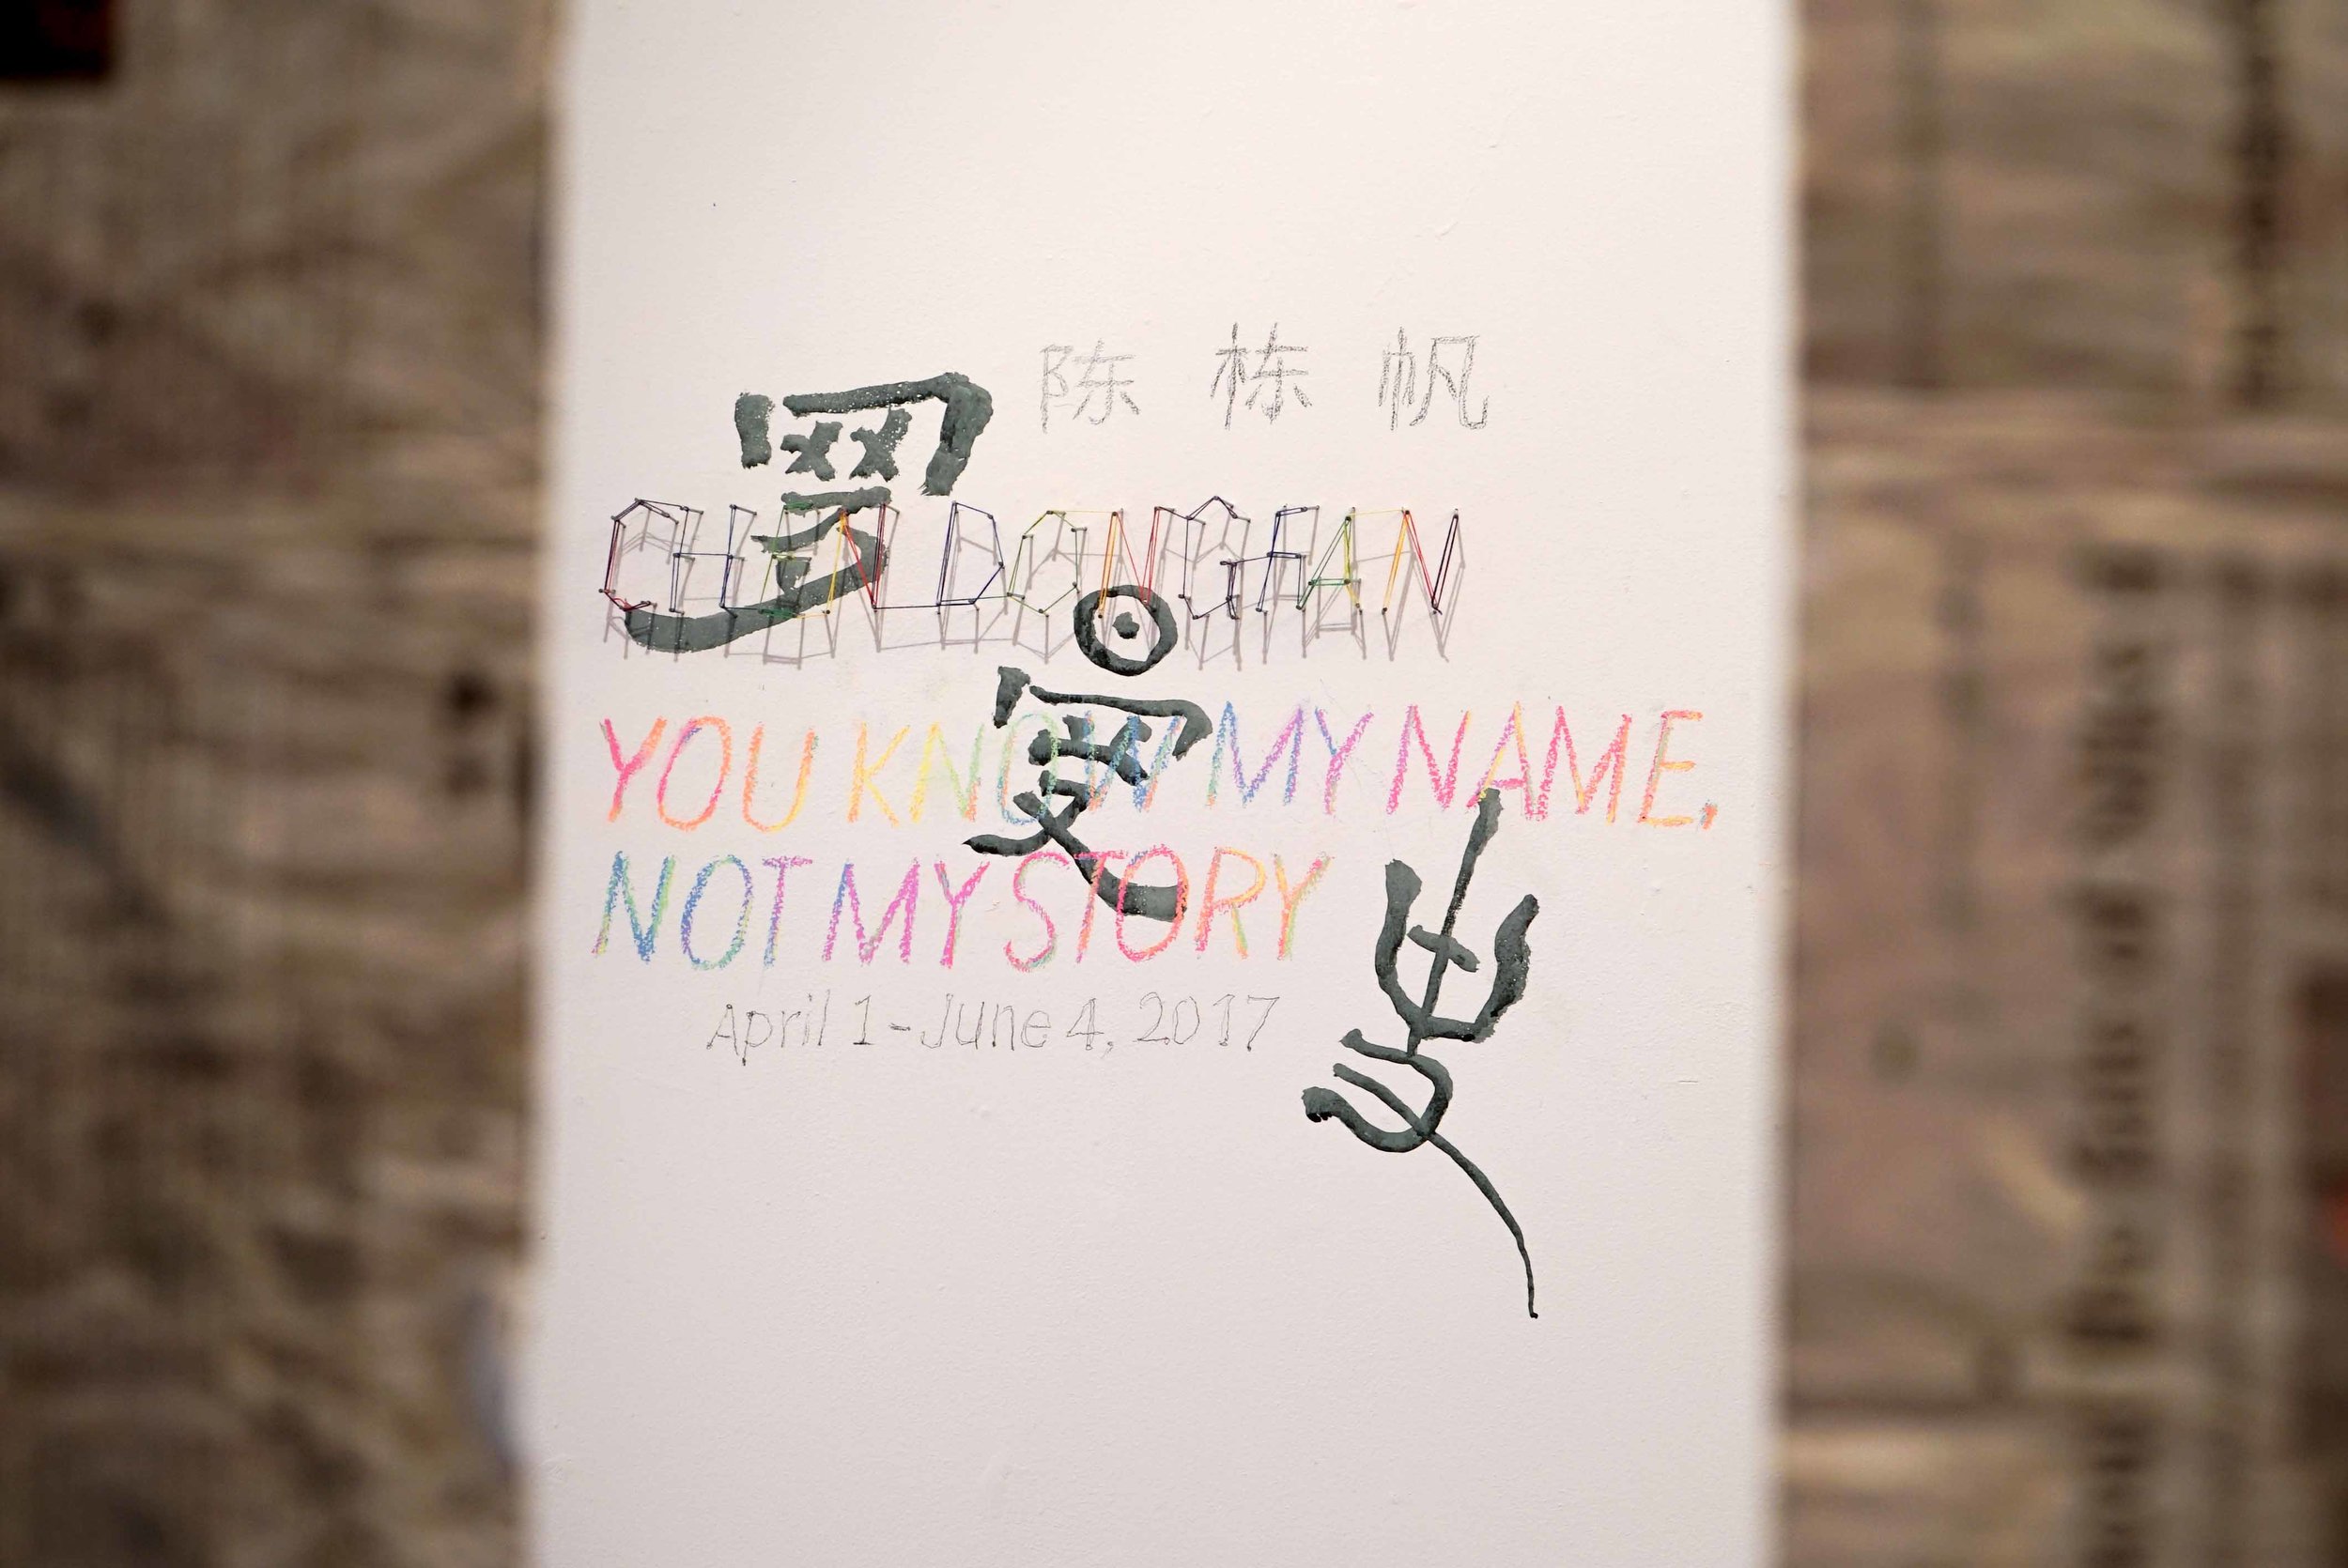 Chen Dongfan: You Know My Name, Not My Story Installation View